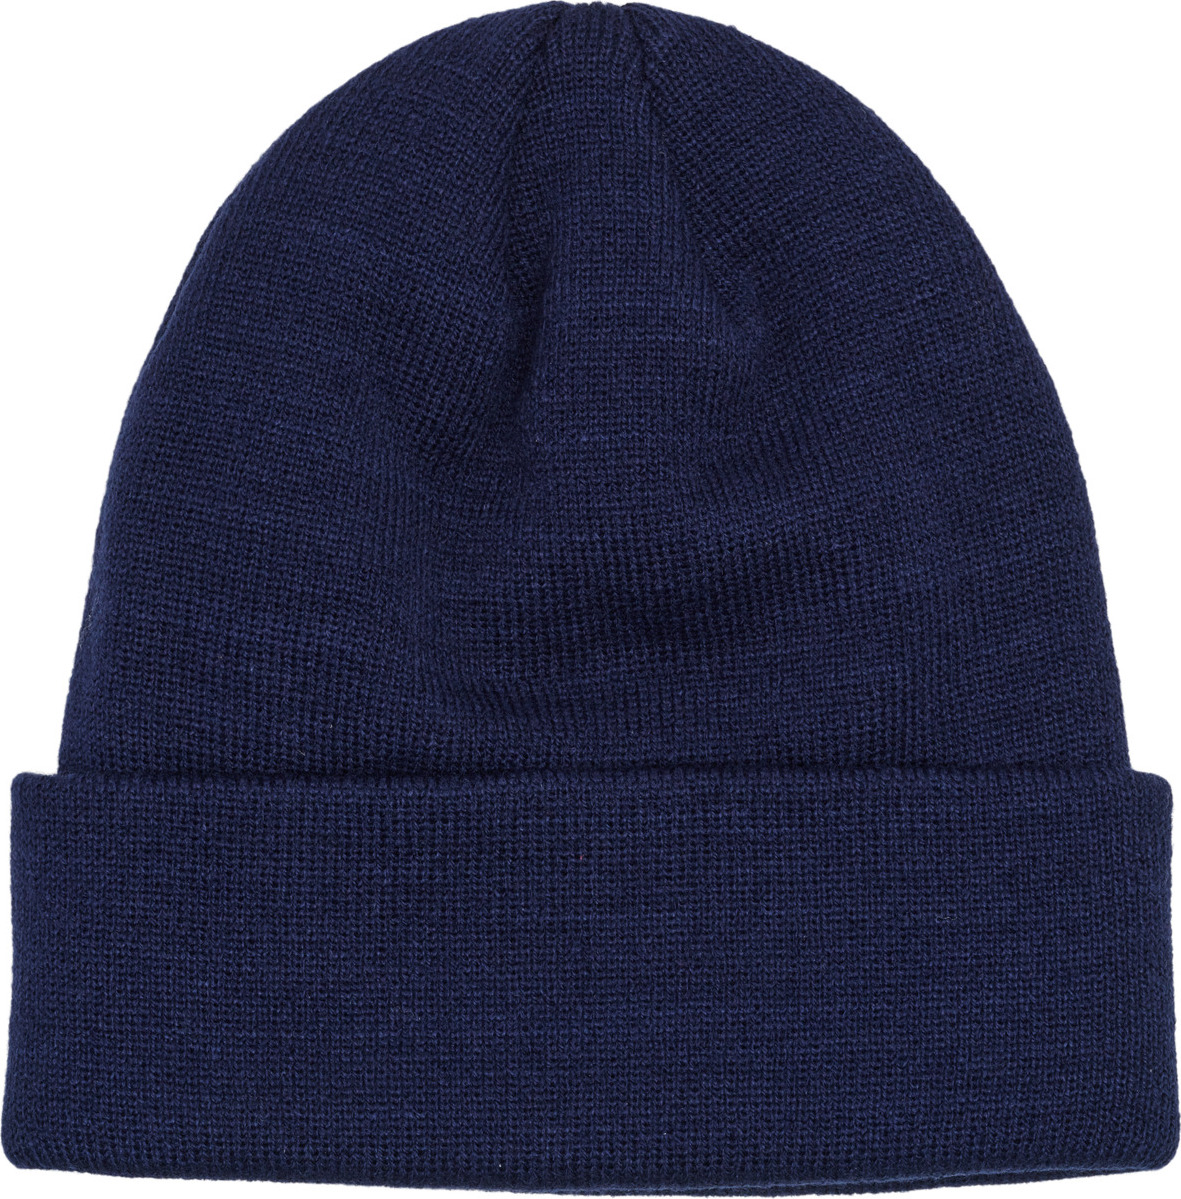 Beanie Outnorth hmlLEGACY Peacoat | Peacoat Buy hmlLEGACY here Core | Core Beanie